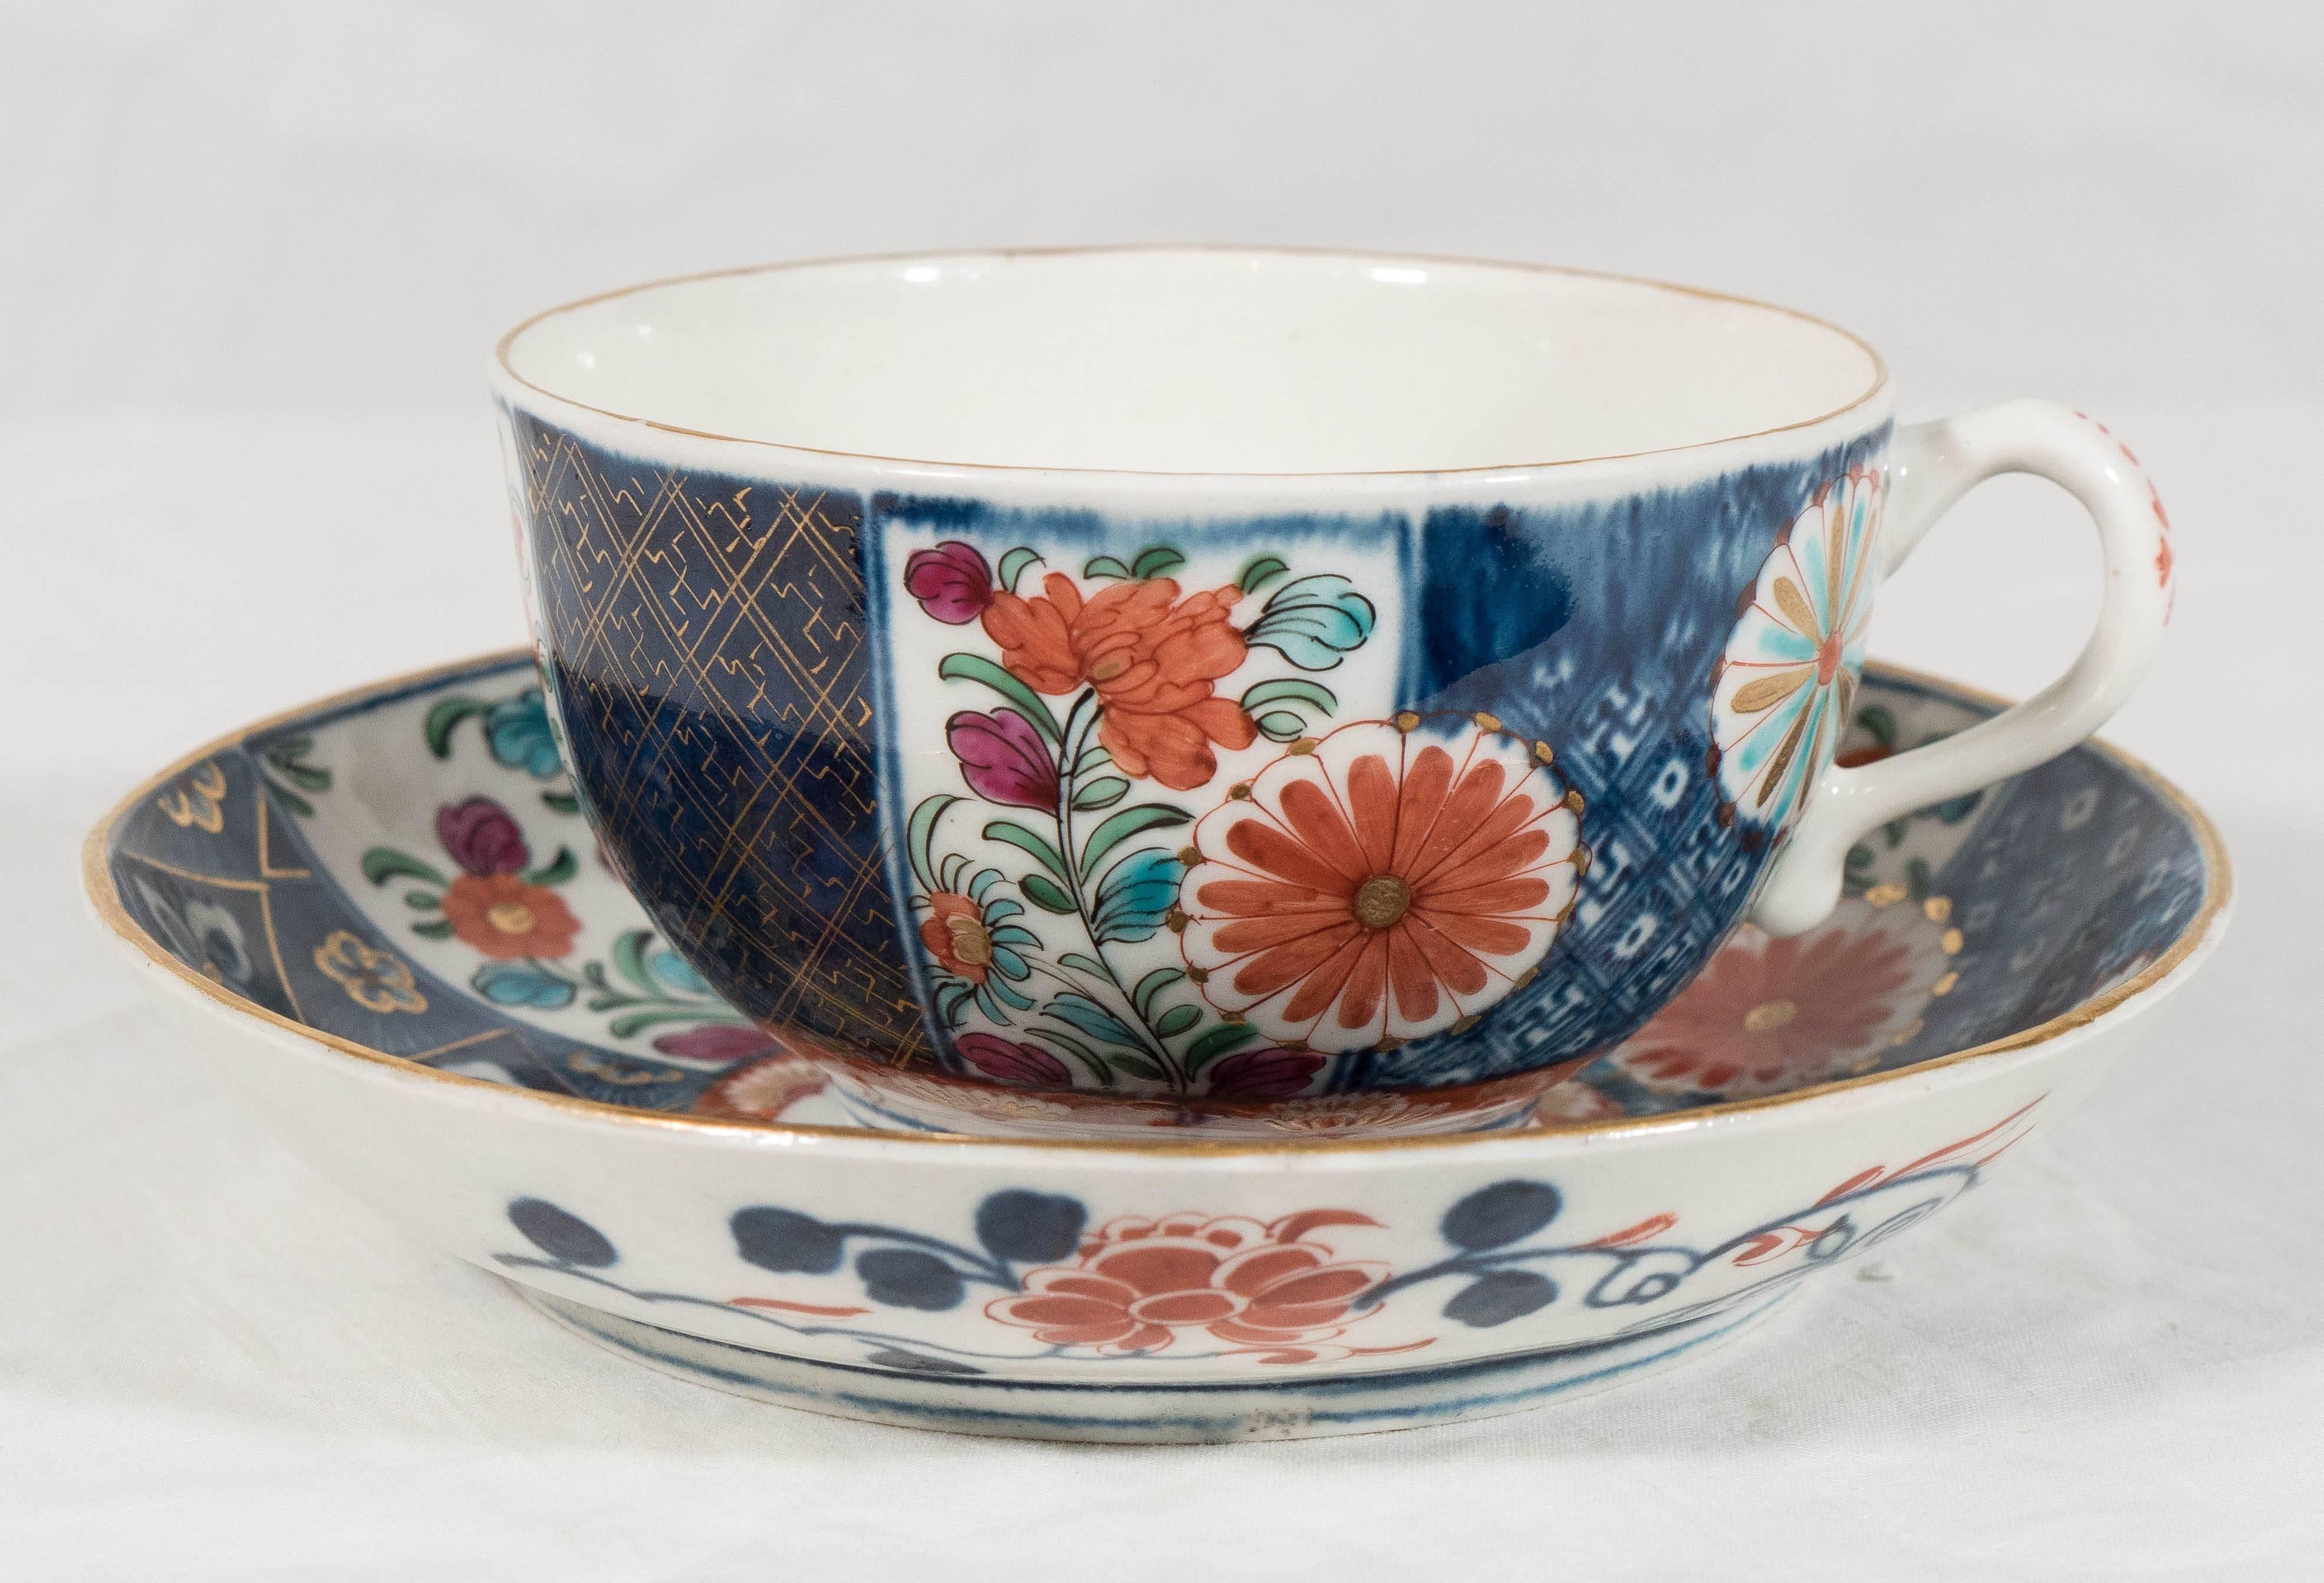 Dr. Wall Worcester Porcelain Cup and Saucer in the 